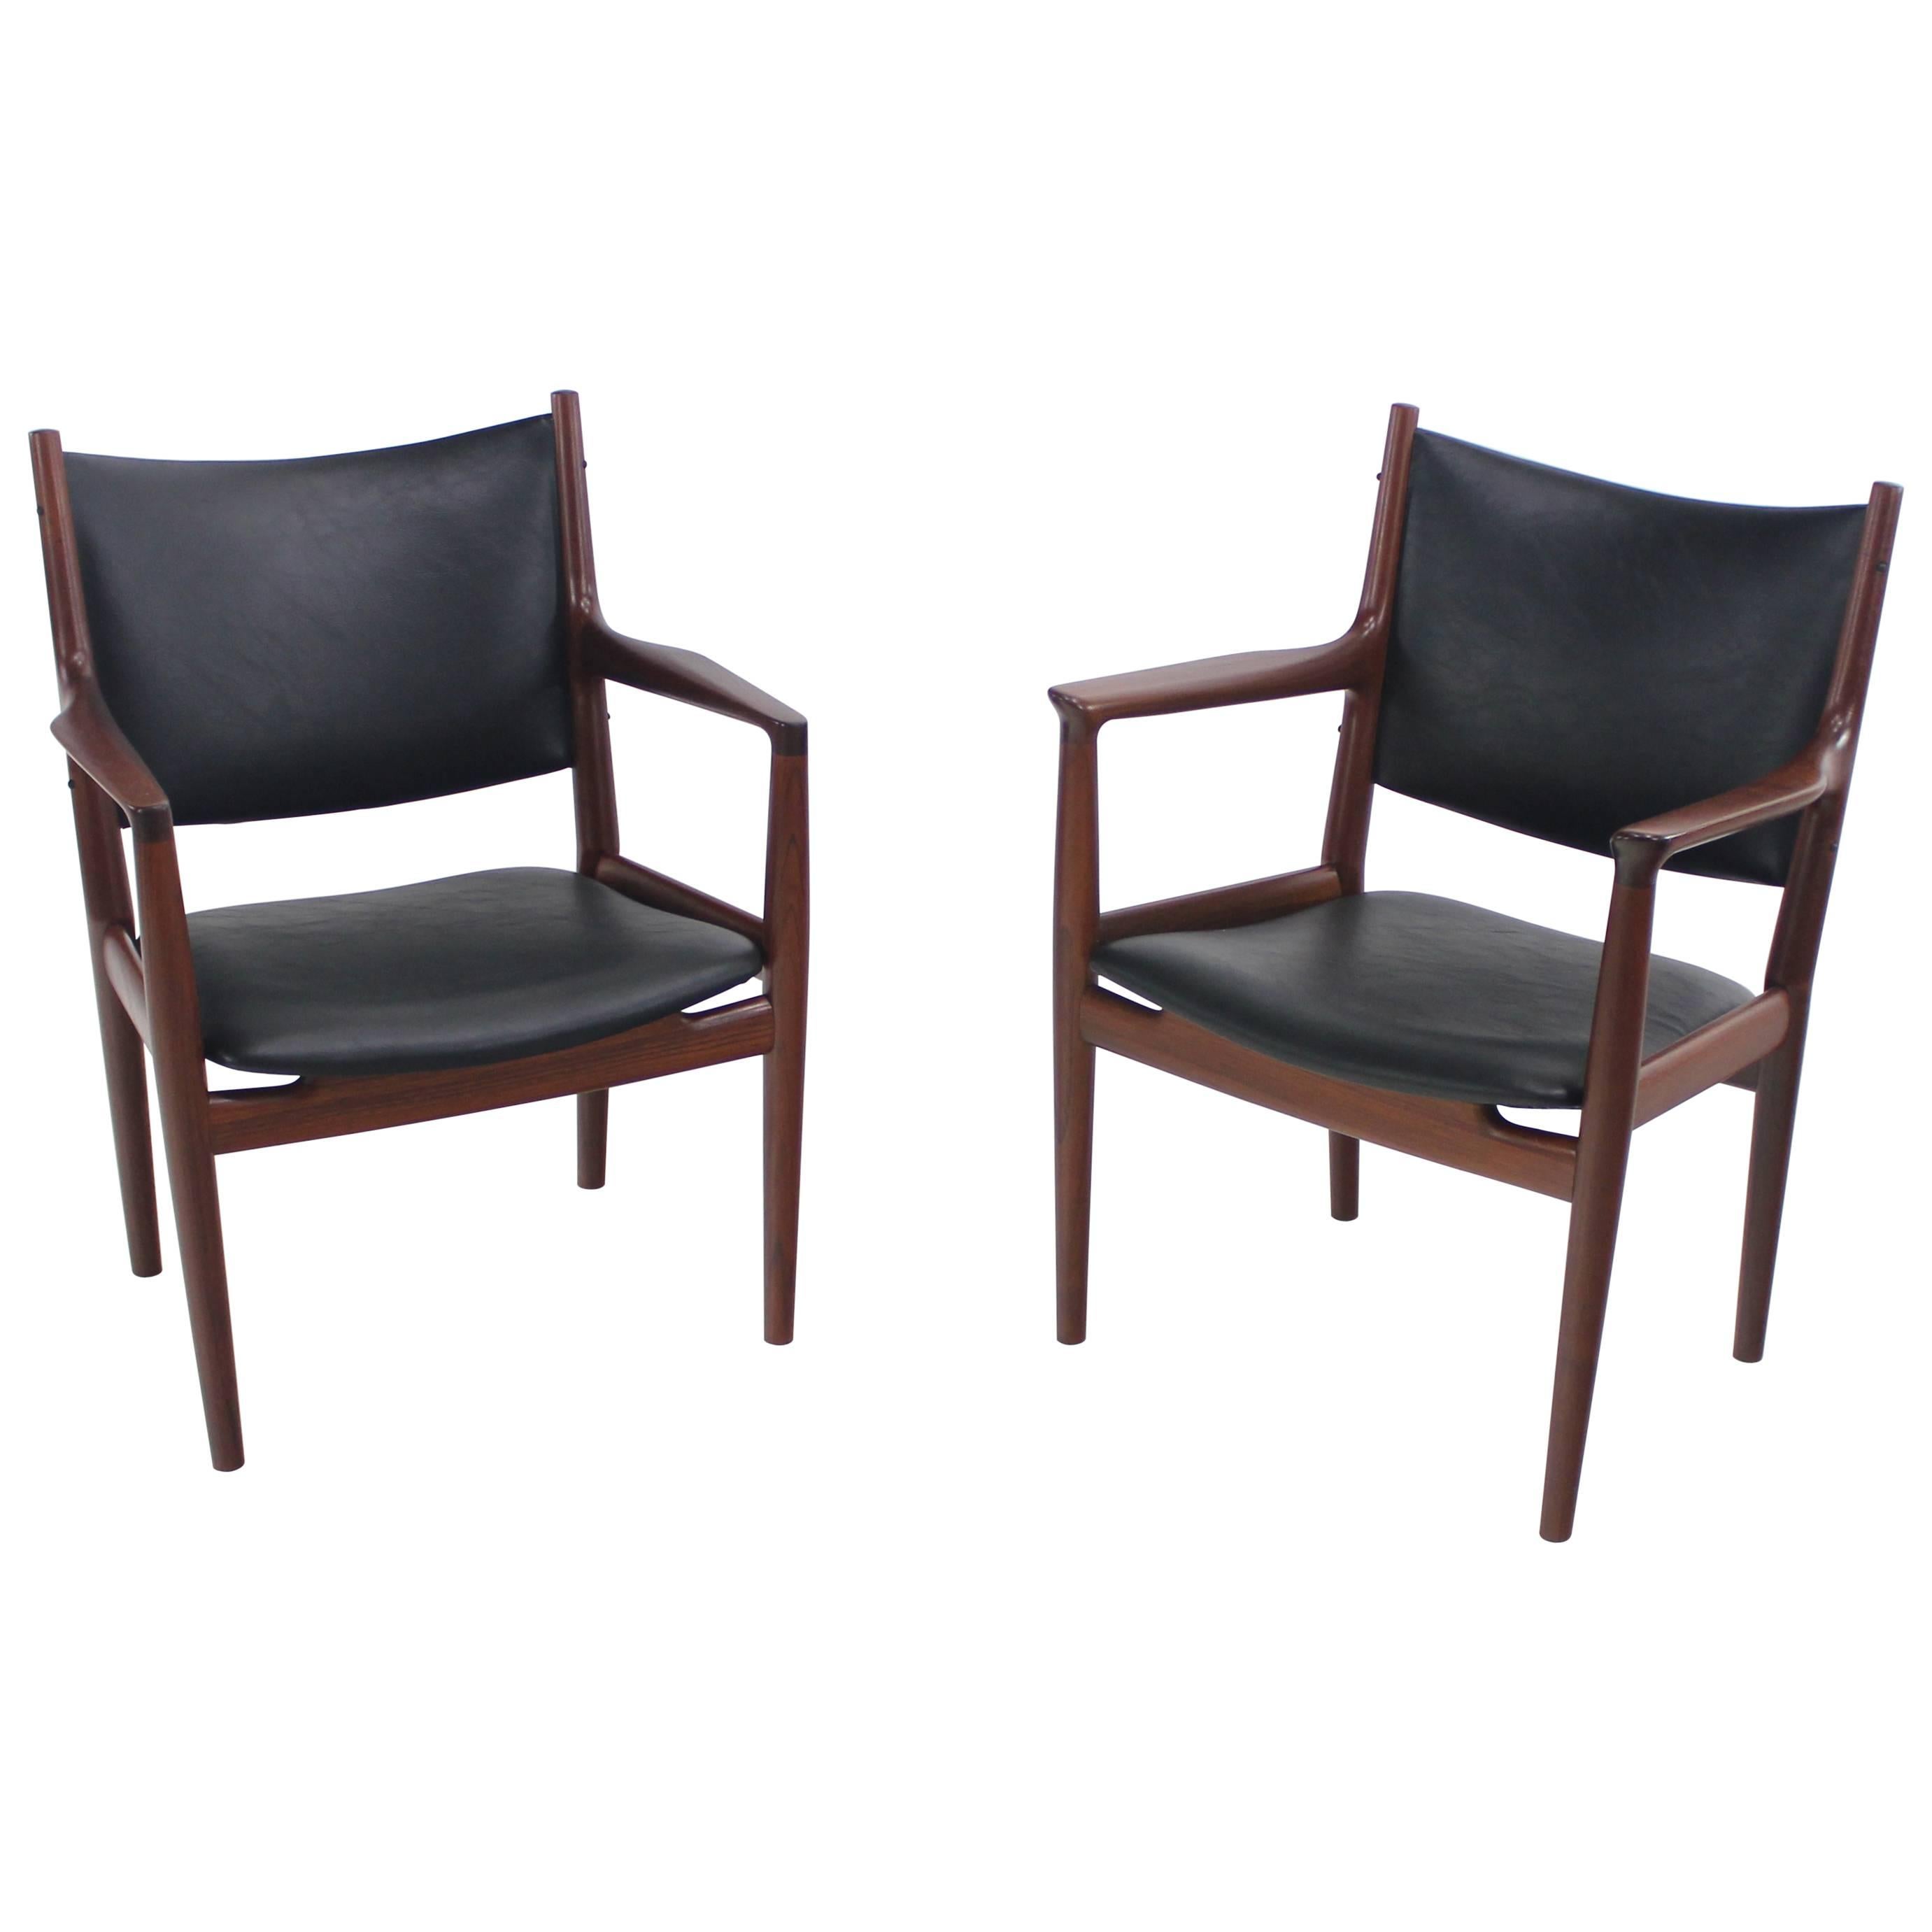 Very Rare Pair of Danish Modern Armchairs Designed by Hans Wegner For Sale